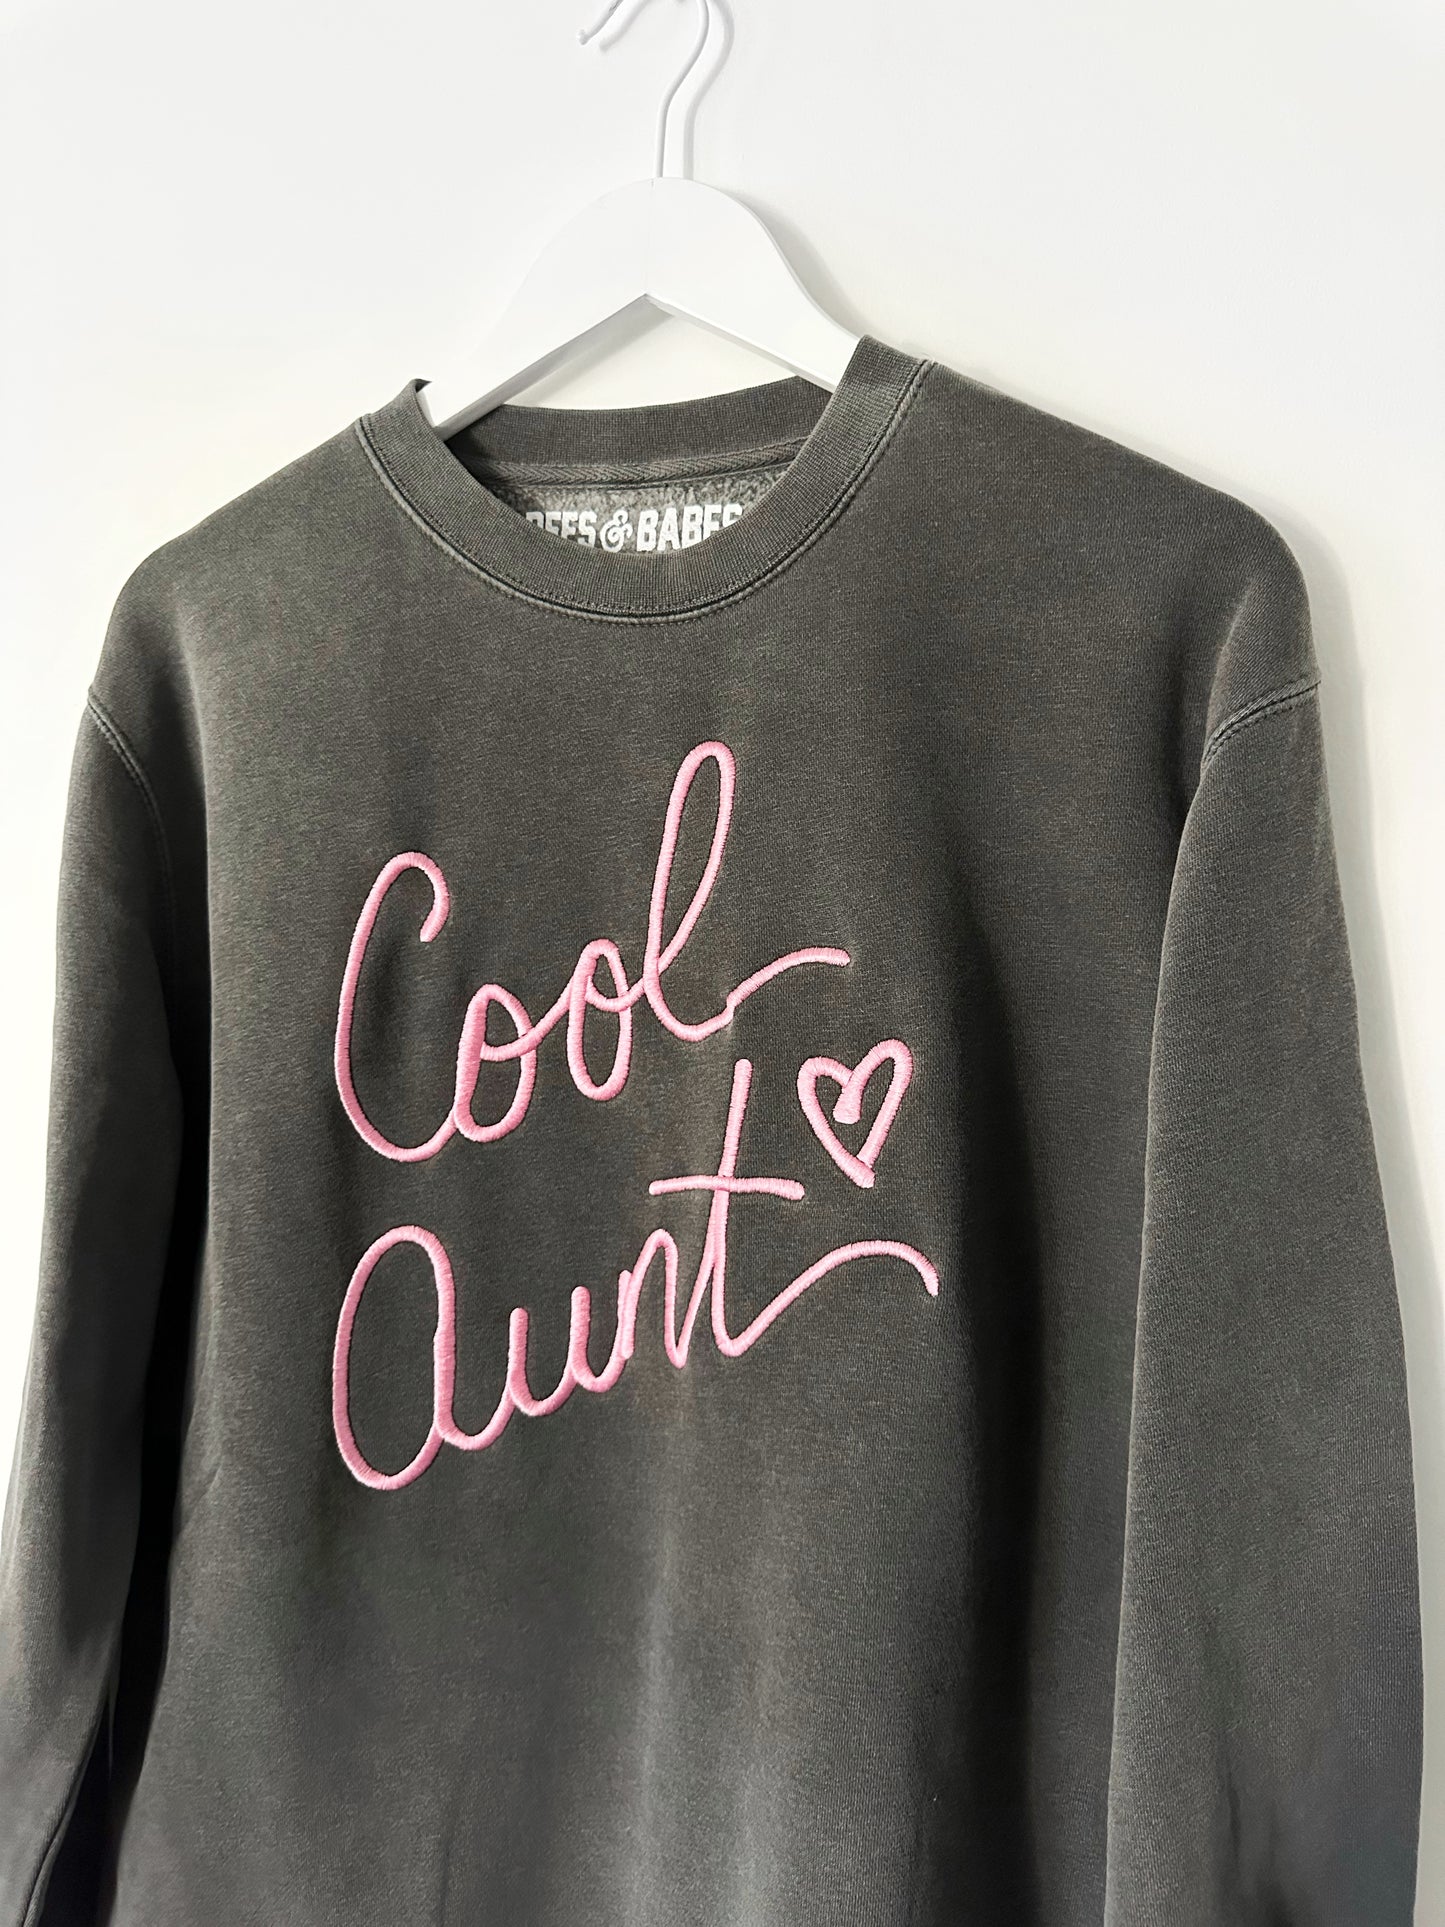 ULTRA COOL AUNT ♡ slate embroidered cool aunt sweatshirt